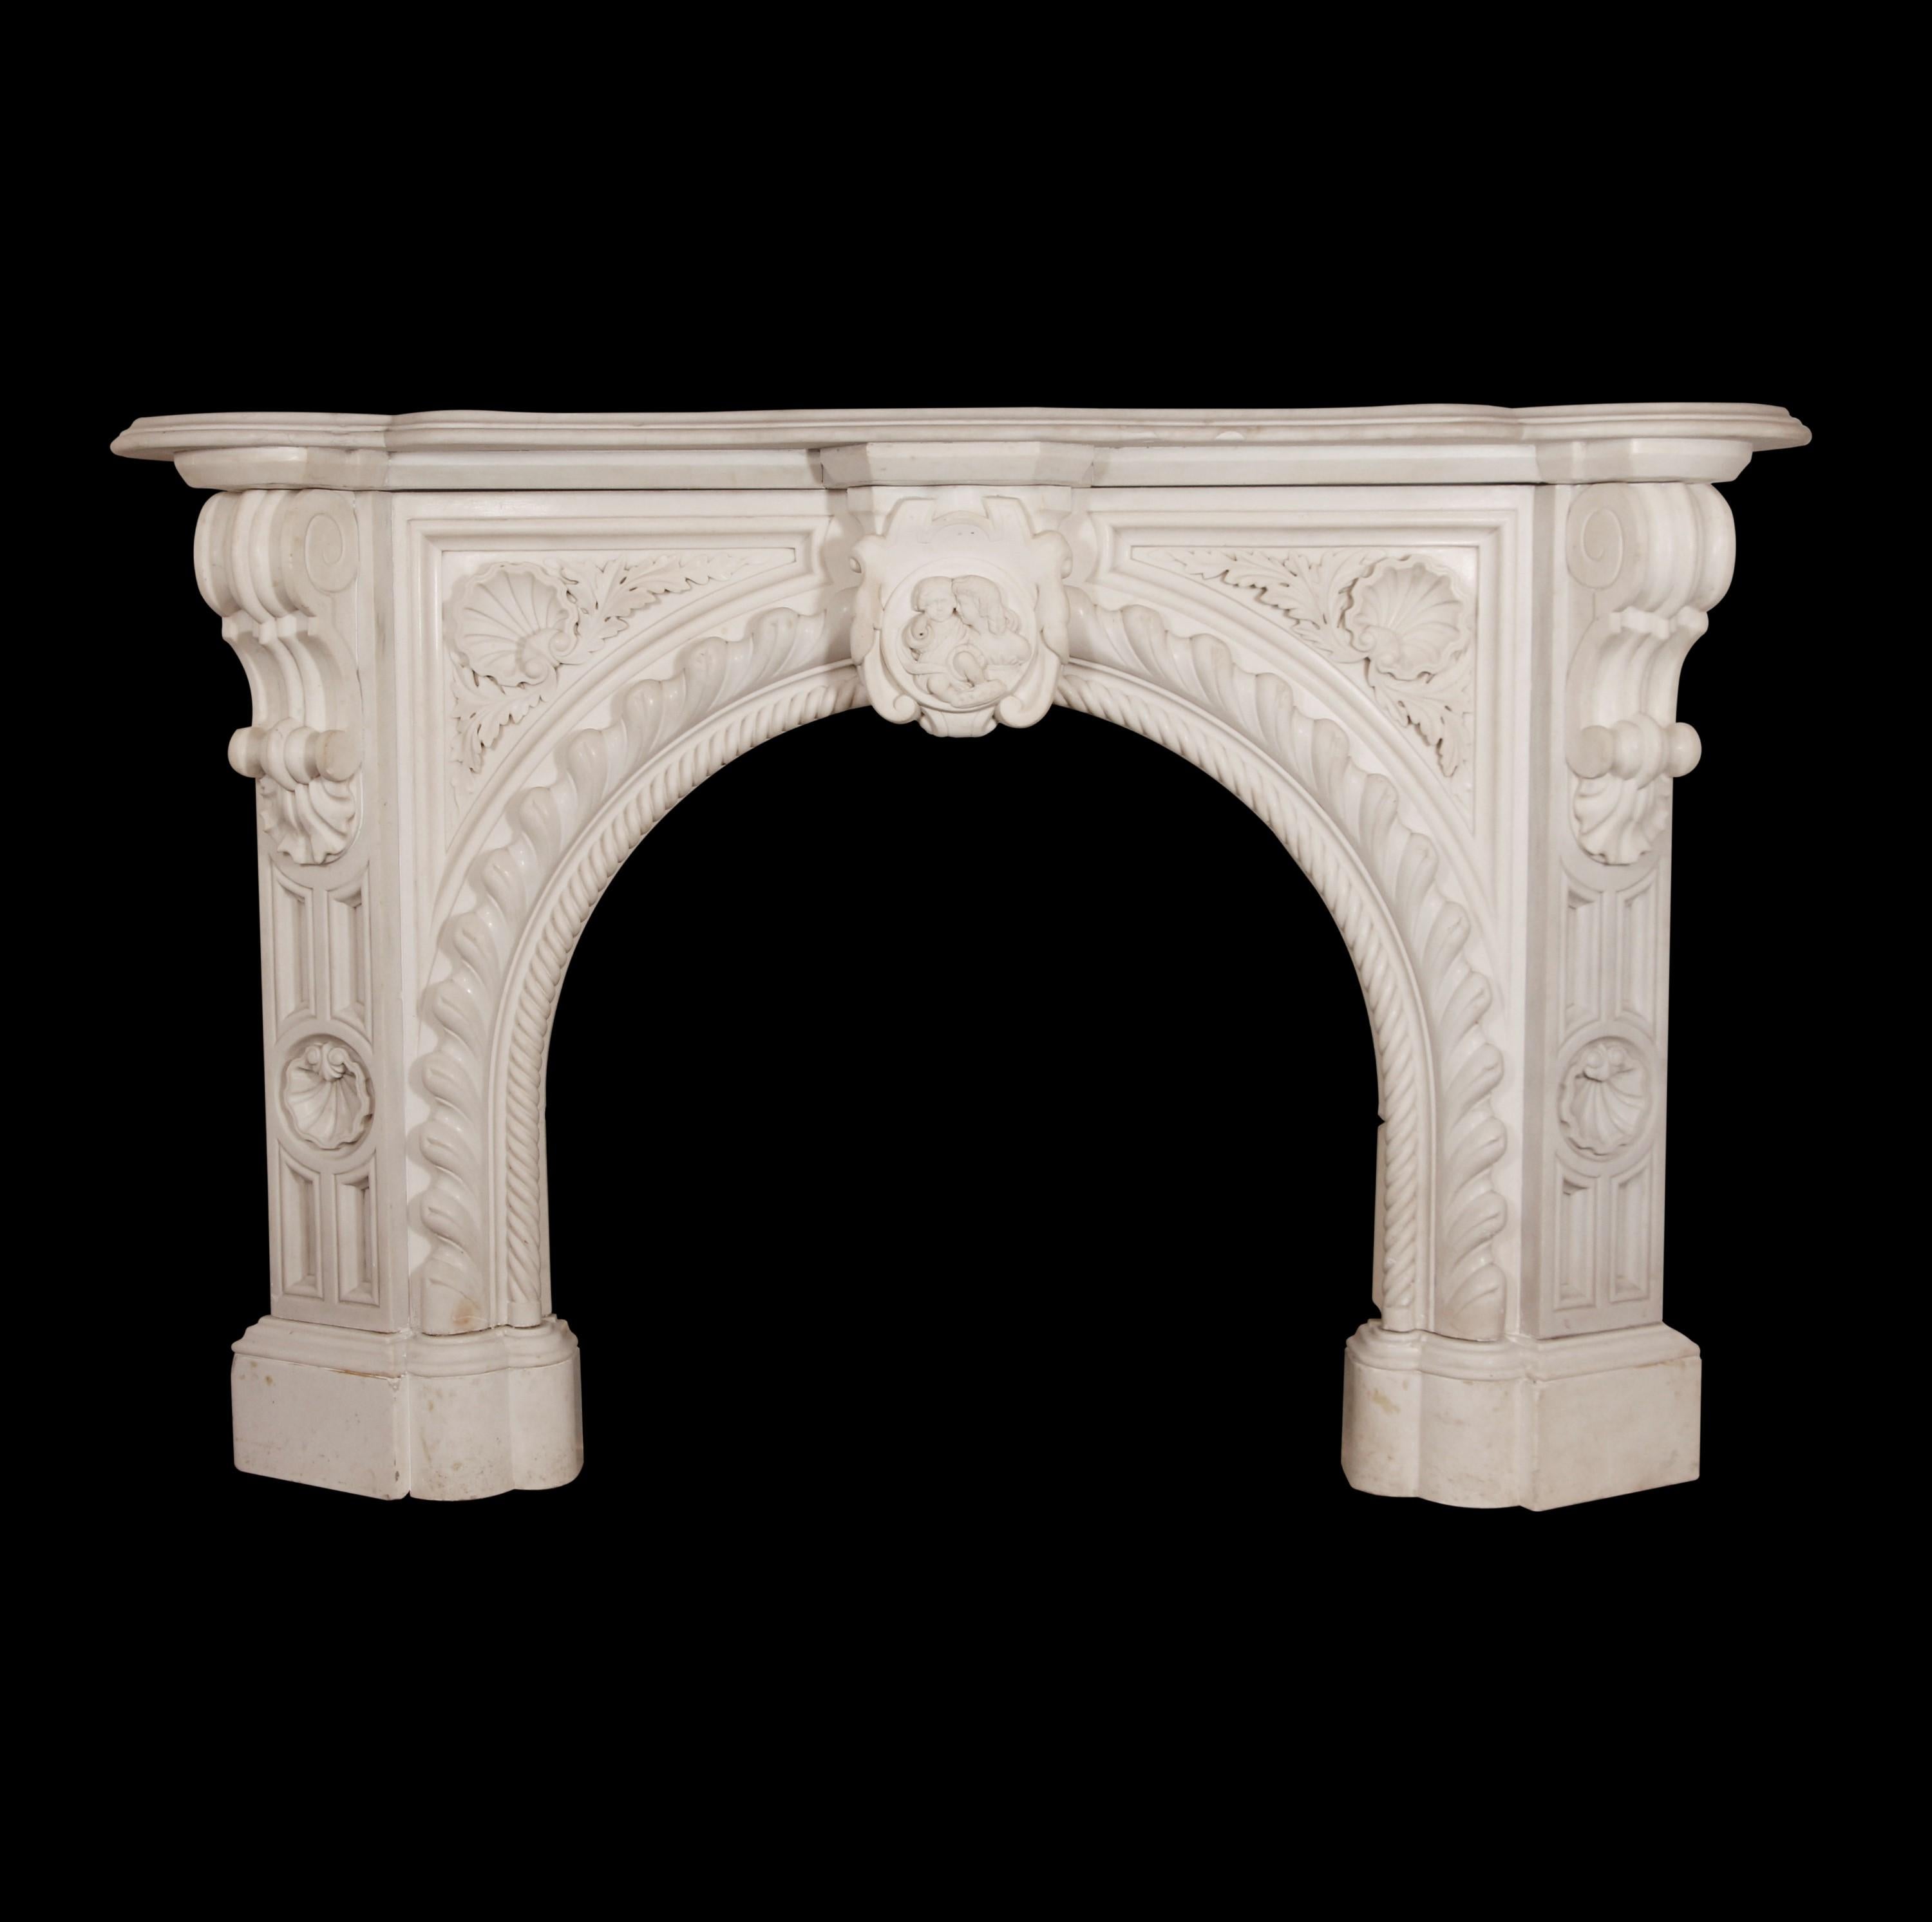 Mid-1860s highly carved Italian ornate mantel hand carved in a rope edge design. Features shells, floral details and a figural keystone. Sides are flanked by opposing large corbels.